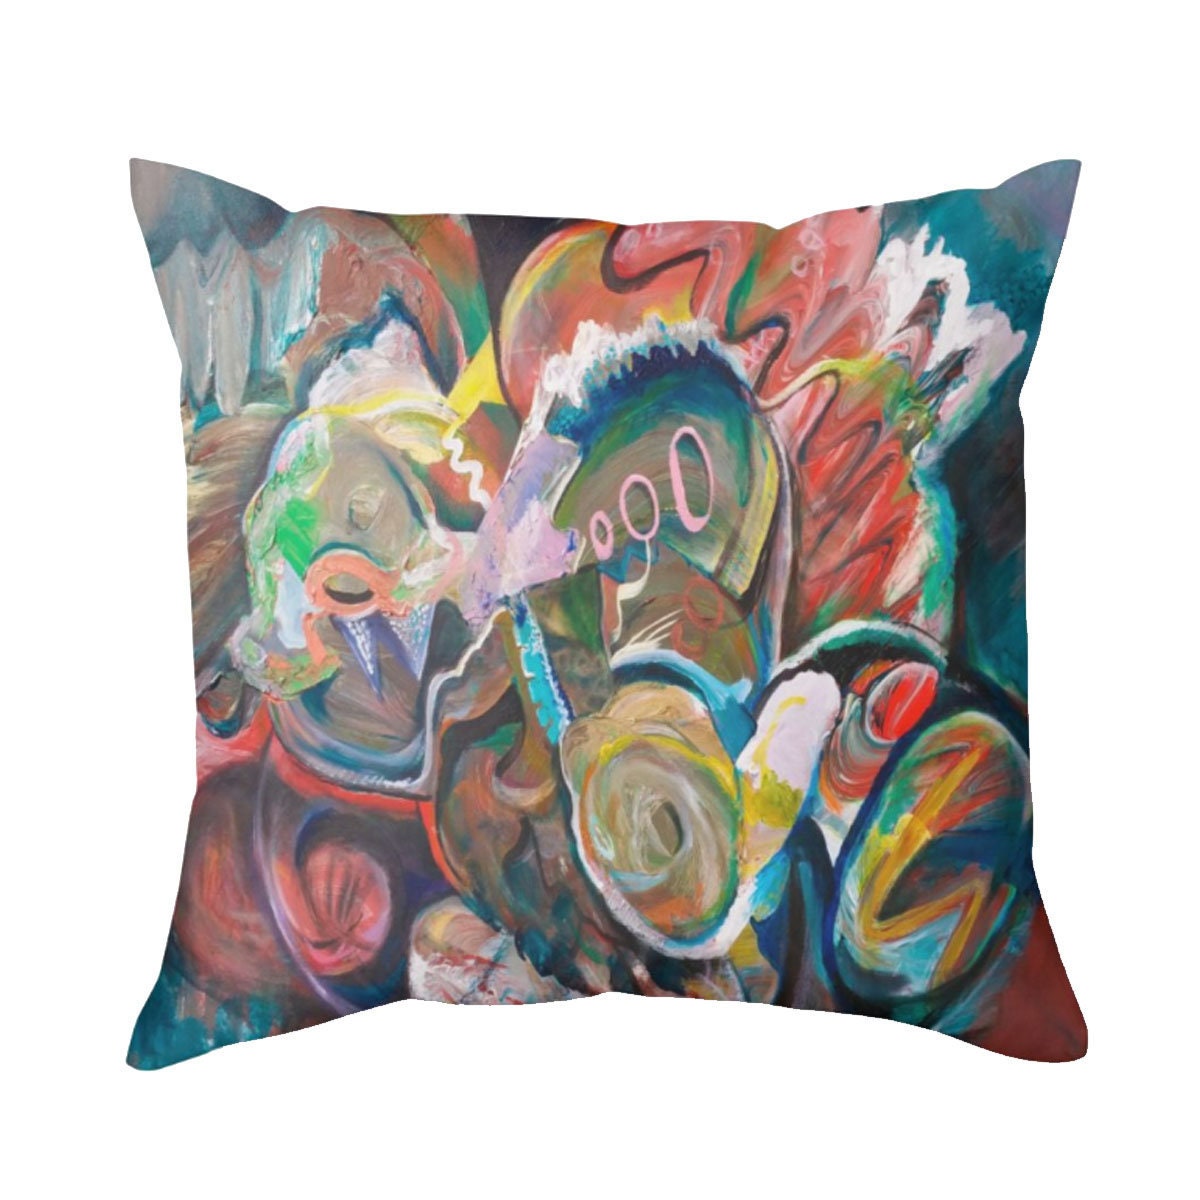 Abstract Art Pillow Unique Gift artsy Pillows for Couch colorful pillows art pillow red pillow abstract art pillow unique pillows